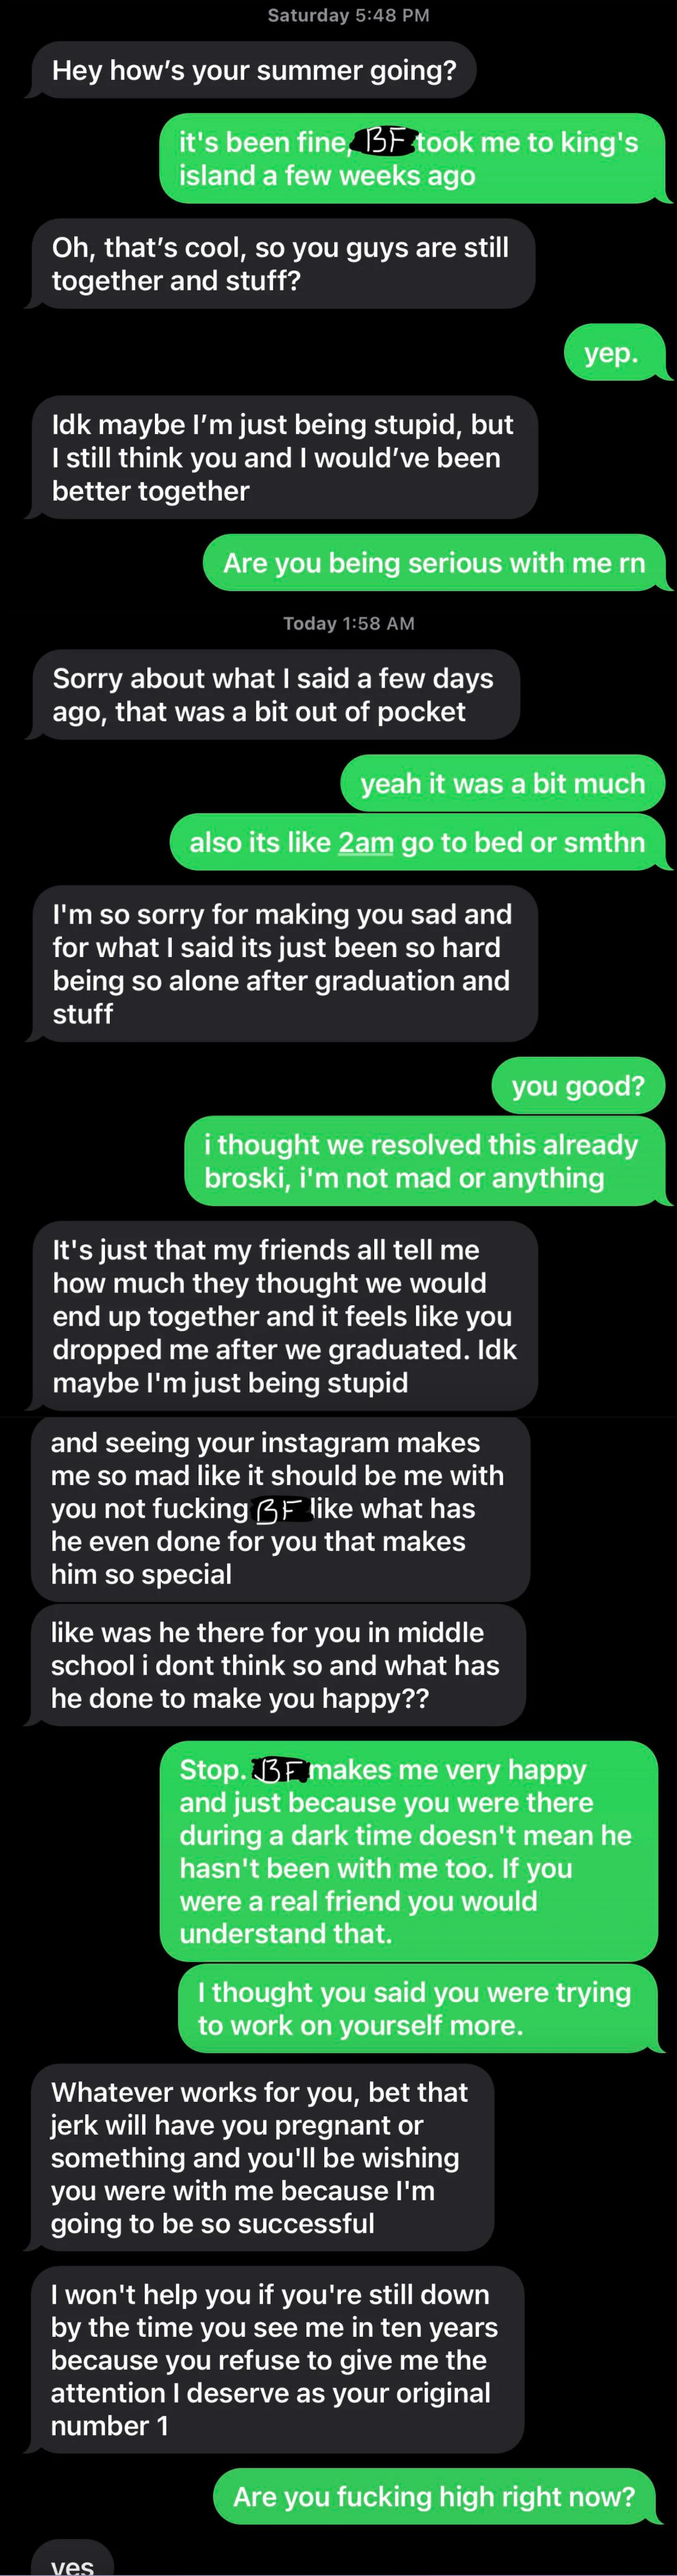 A man tells a woman that her Instagram posts with her boyfriend upset her because she should be with him instead, then says her boyfriend will probably impregnate her